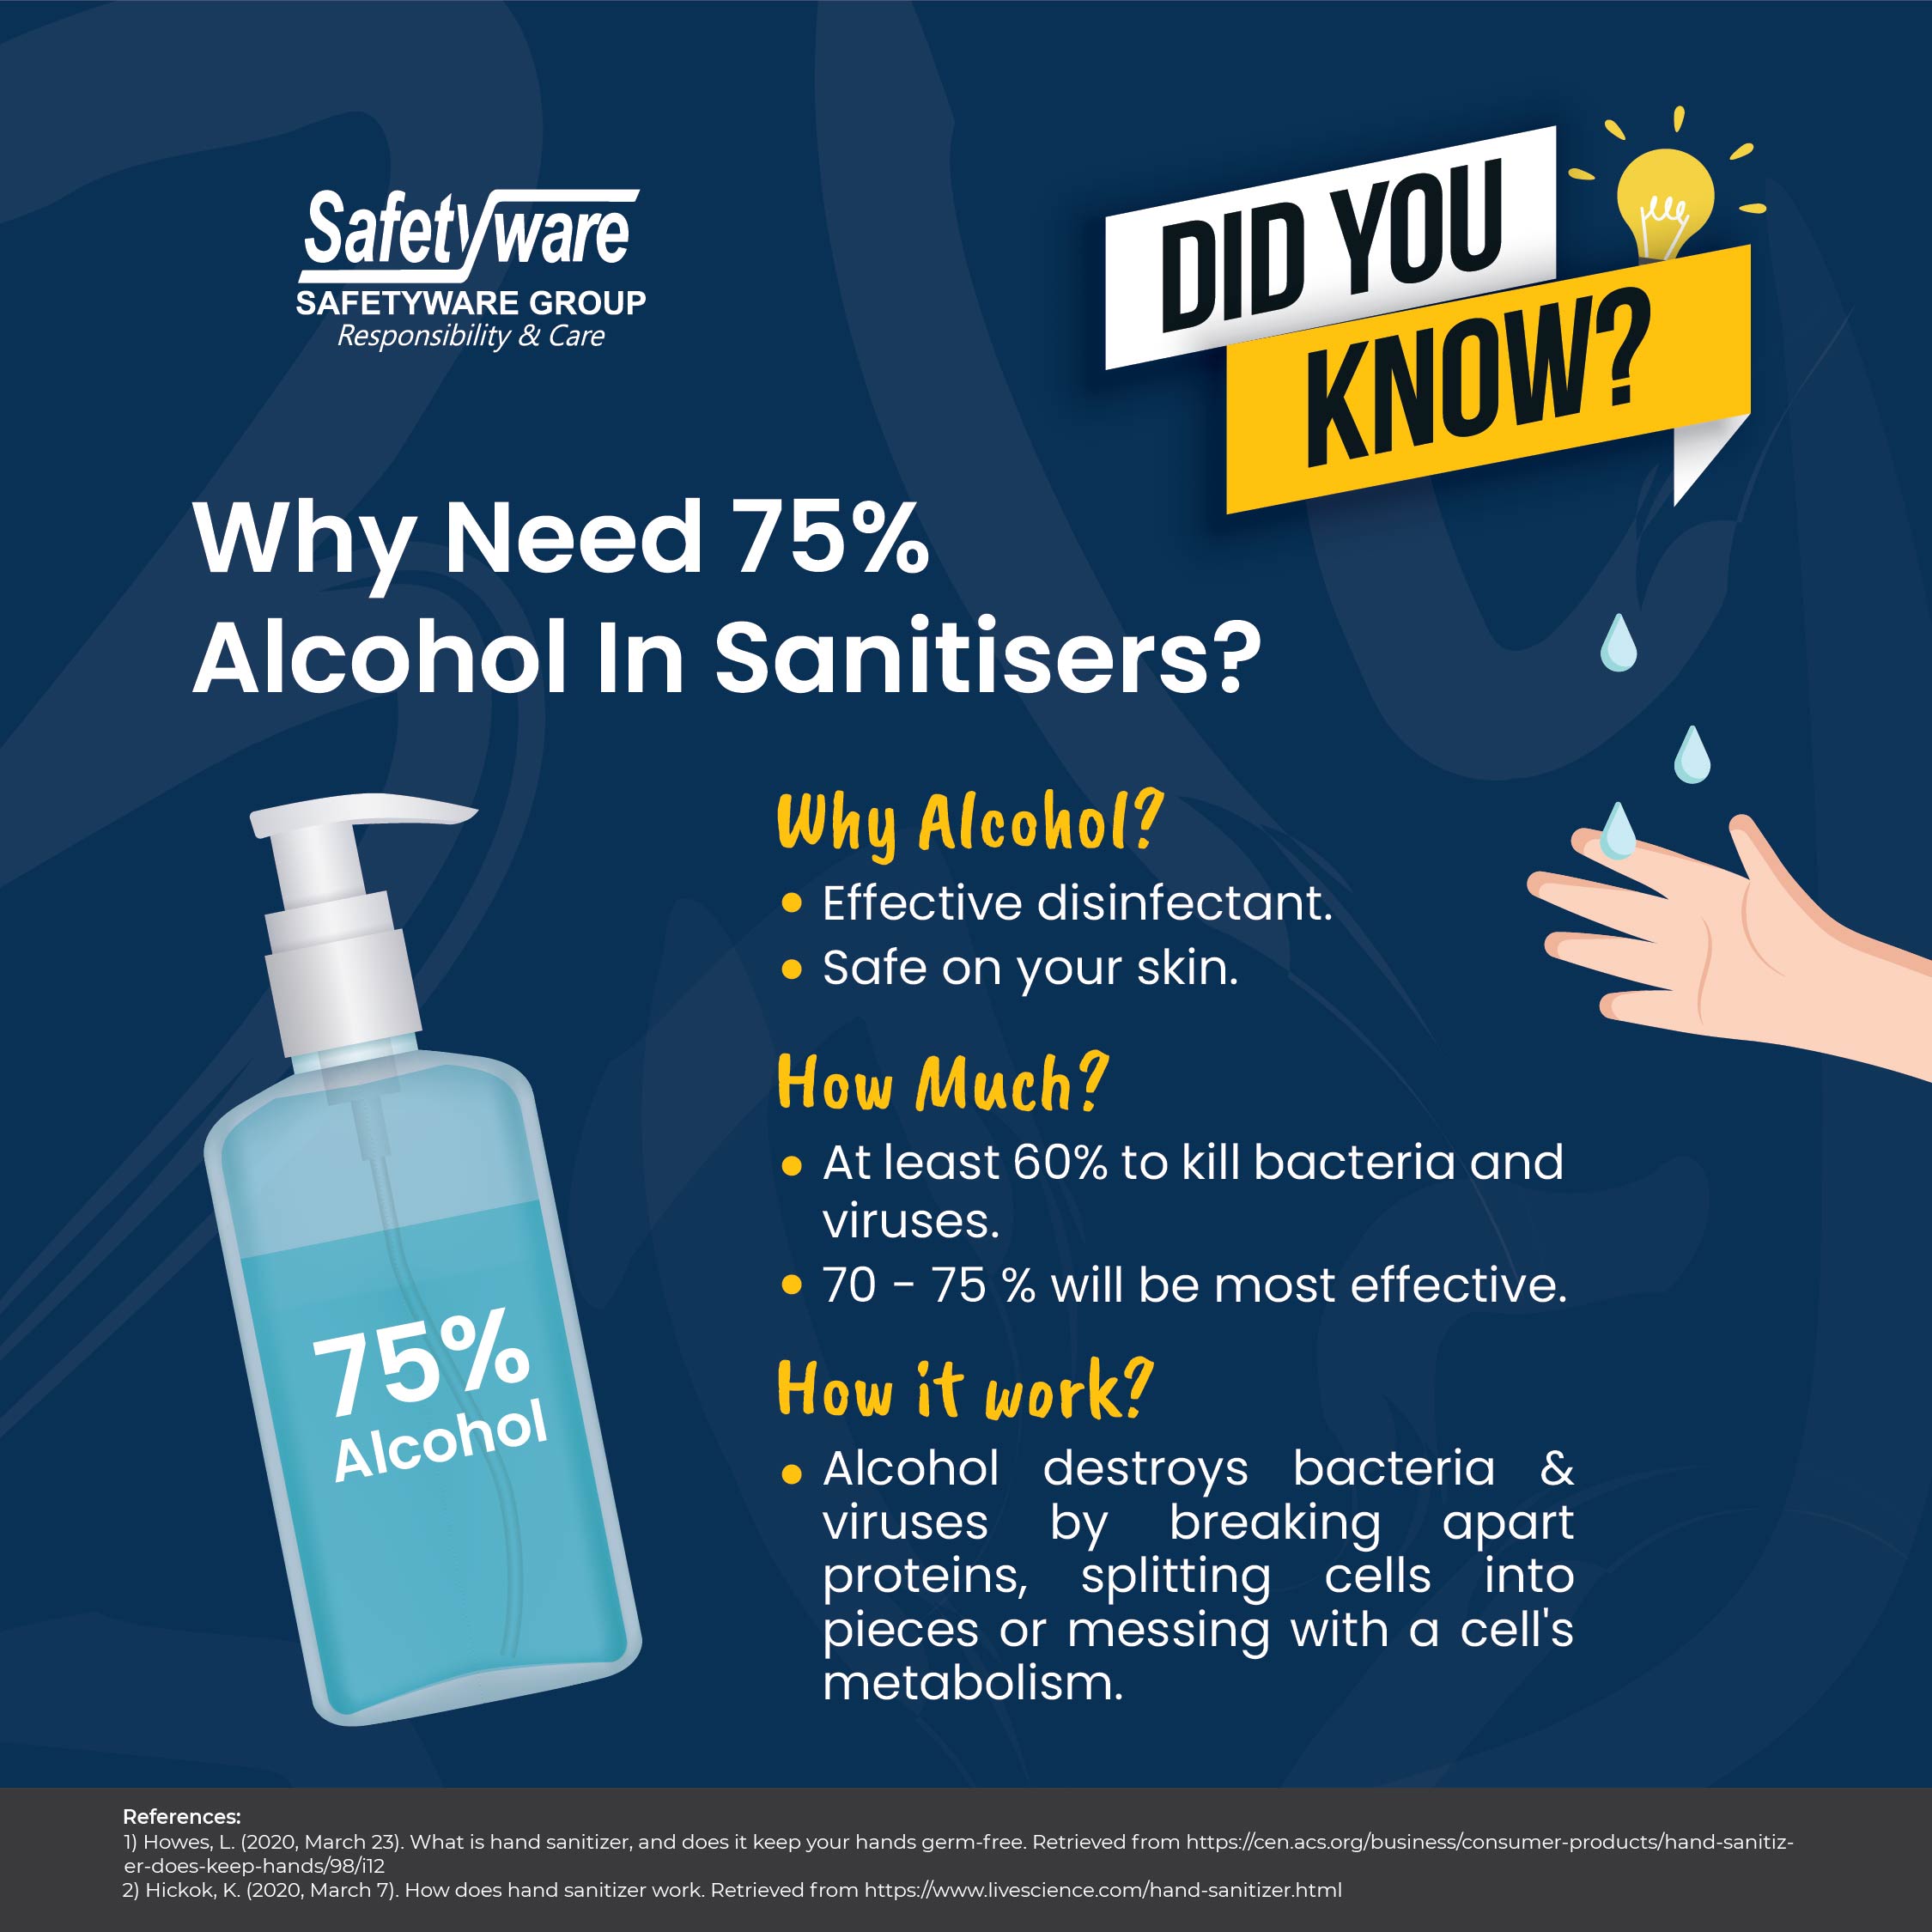 Why-Need-75-Alcohol-in-Sanitisers